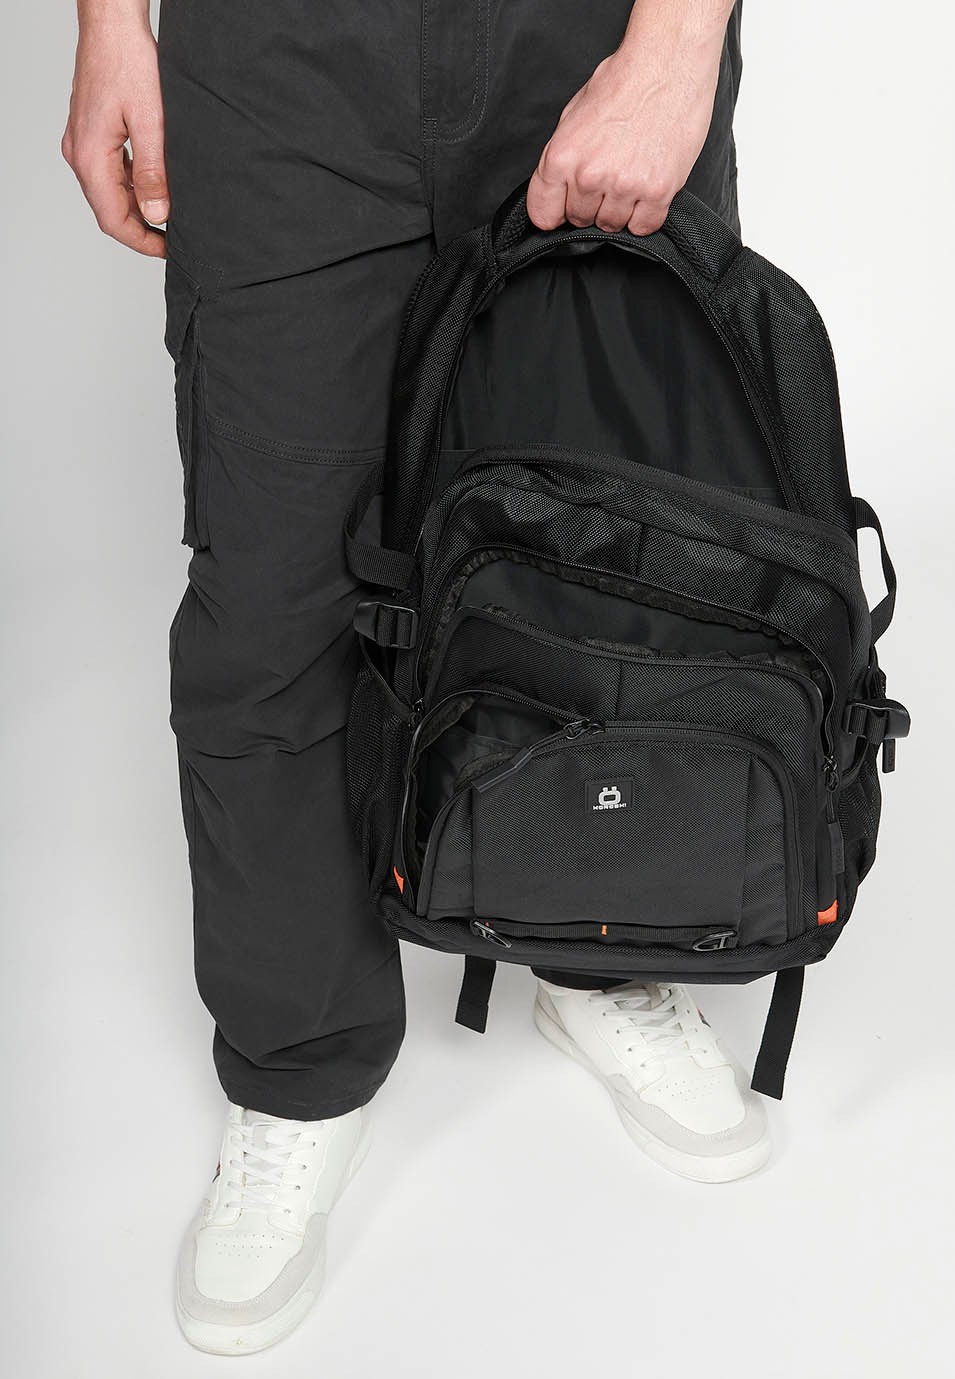 Koröshi backpack with three zippered compartments, one for a laptop, with black interior pockets 9